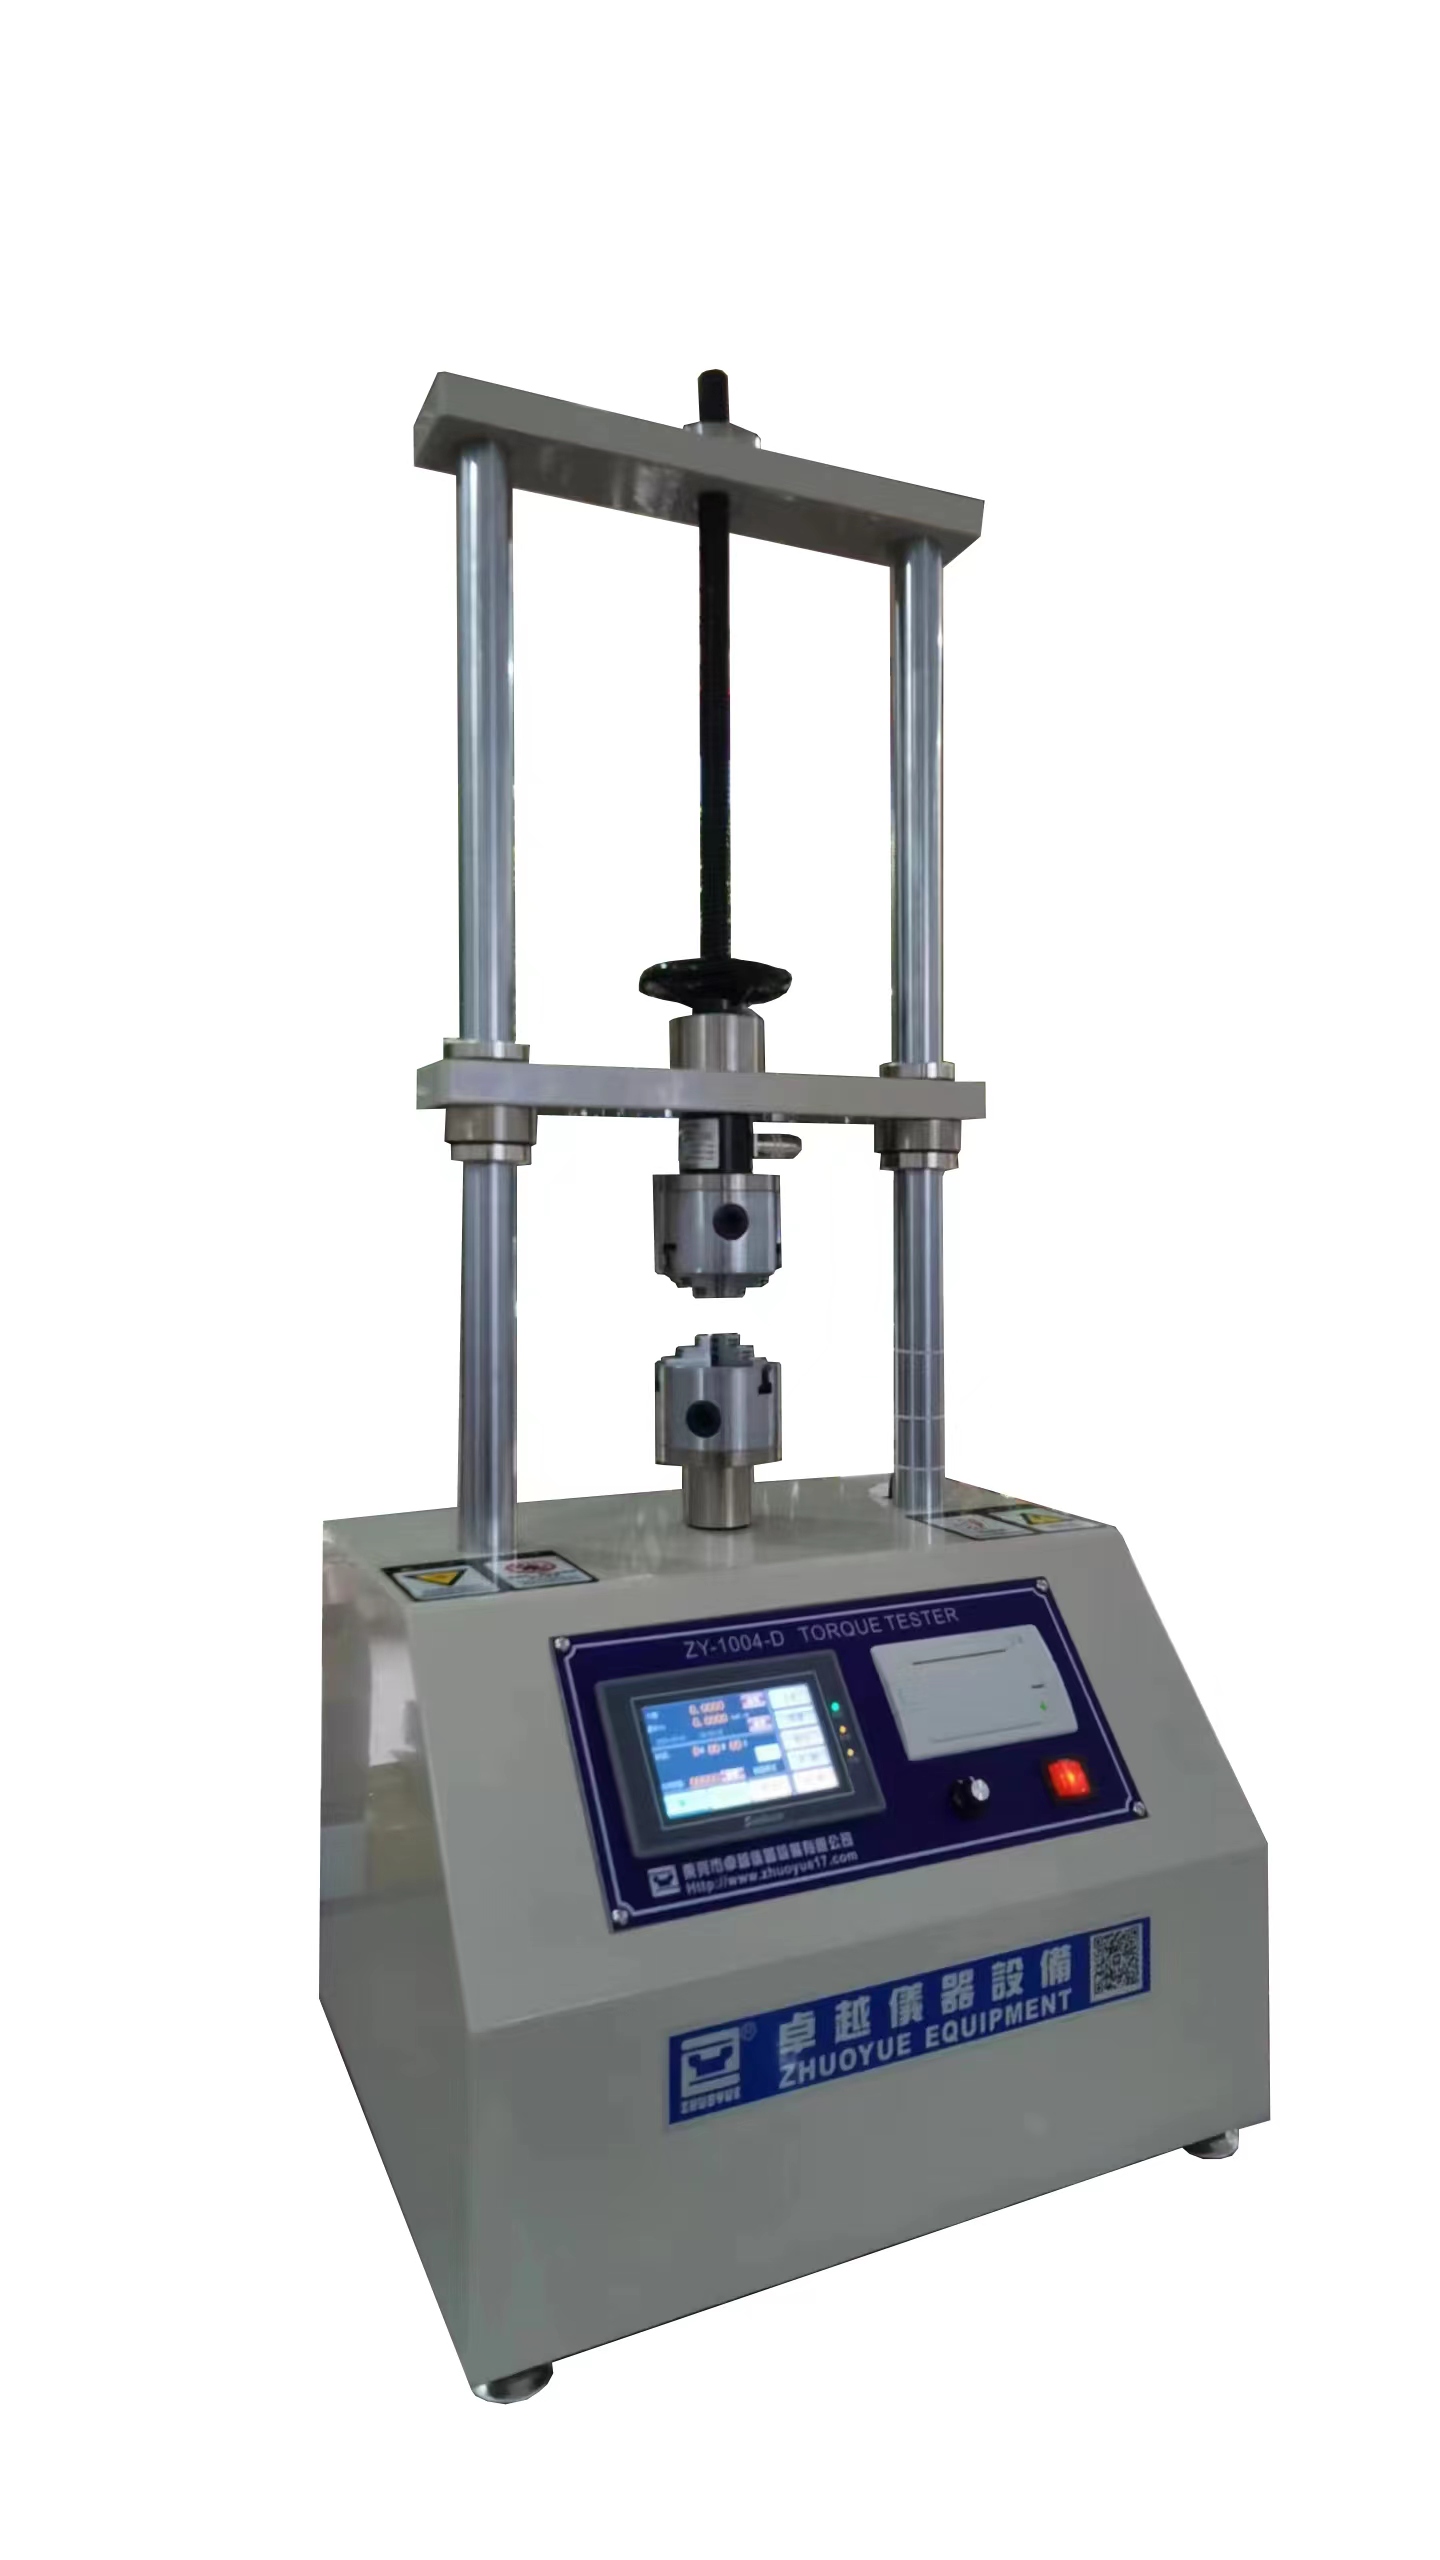 ZY-1004-D touch screen electronic torque testing machine